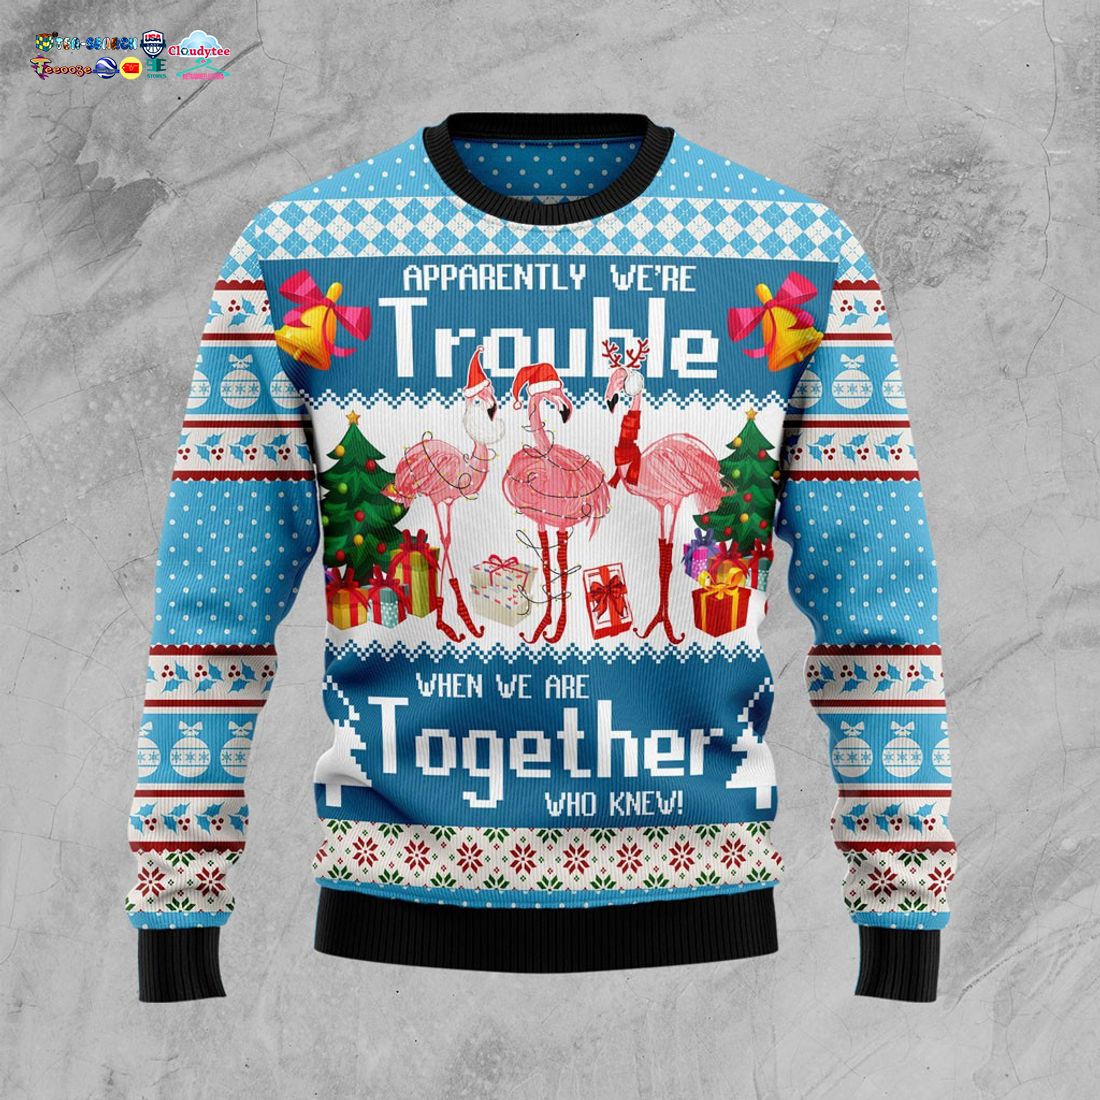 Flamingo Apparently We’re Trouble When We Are Together Who Knew Ugly Christmas Sweater